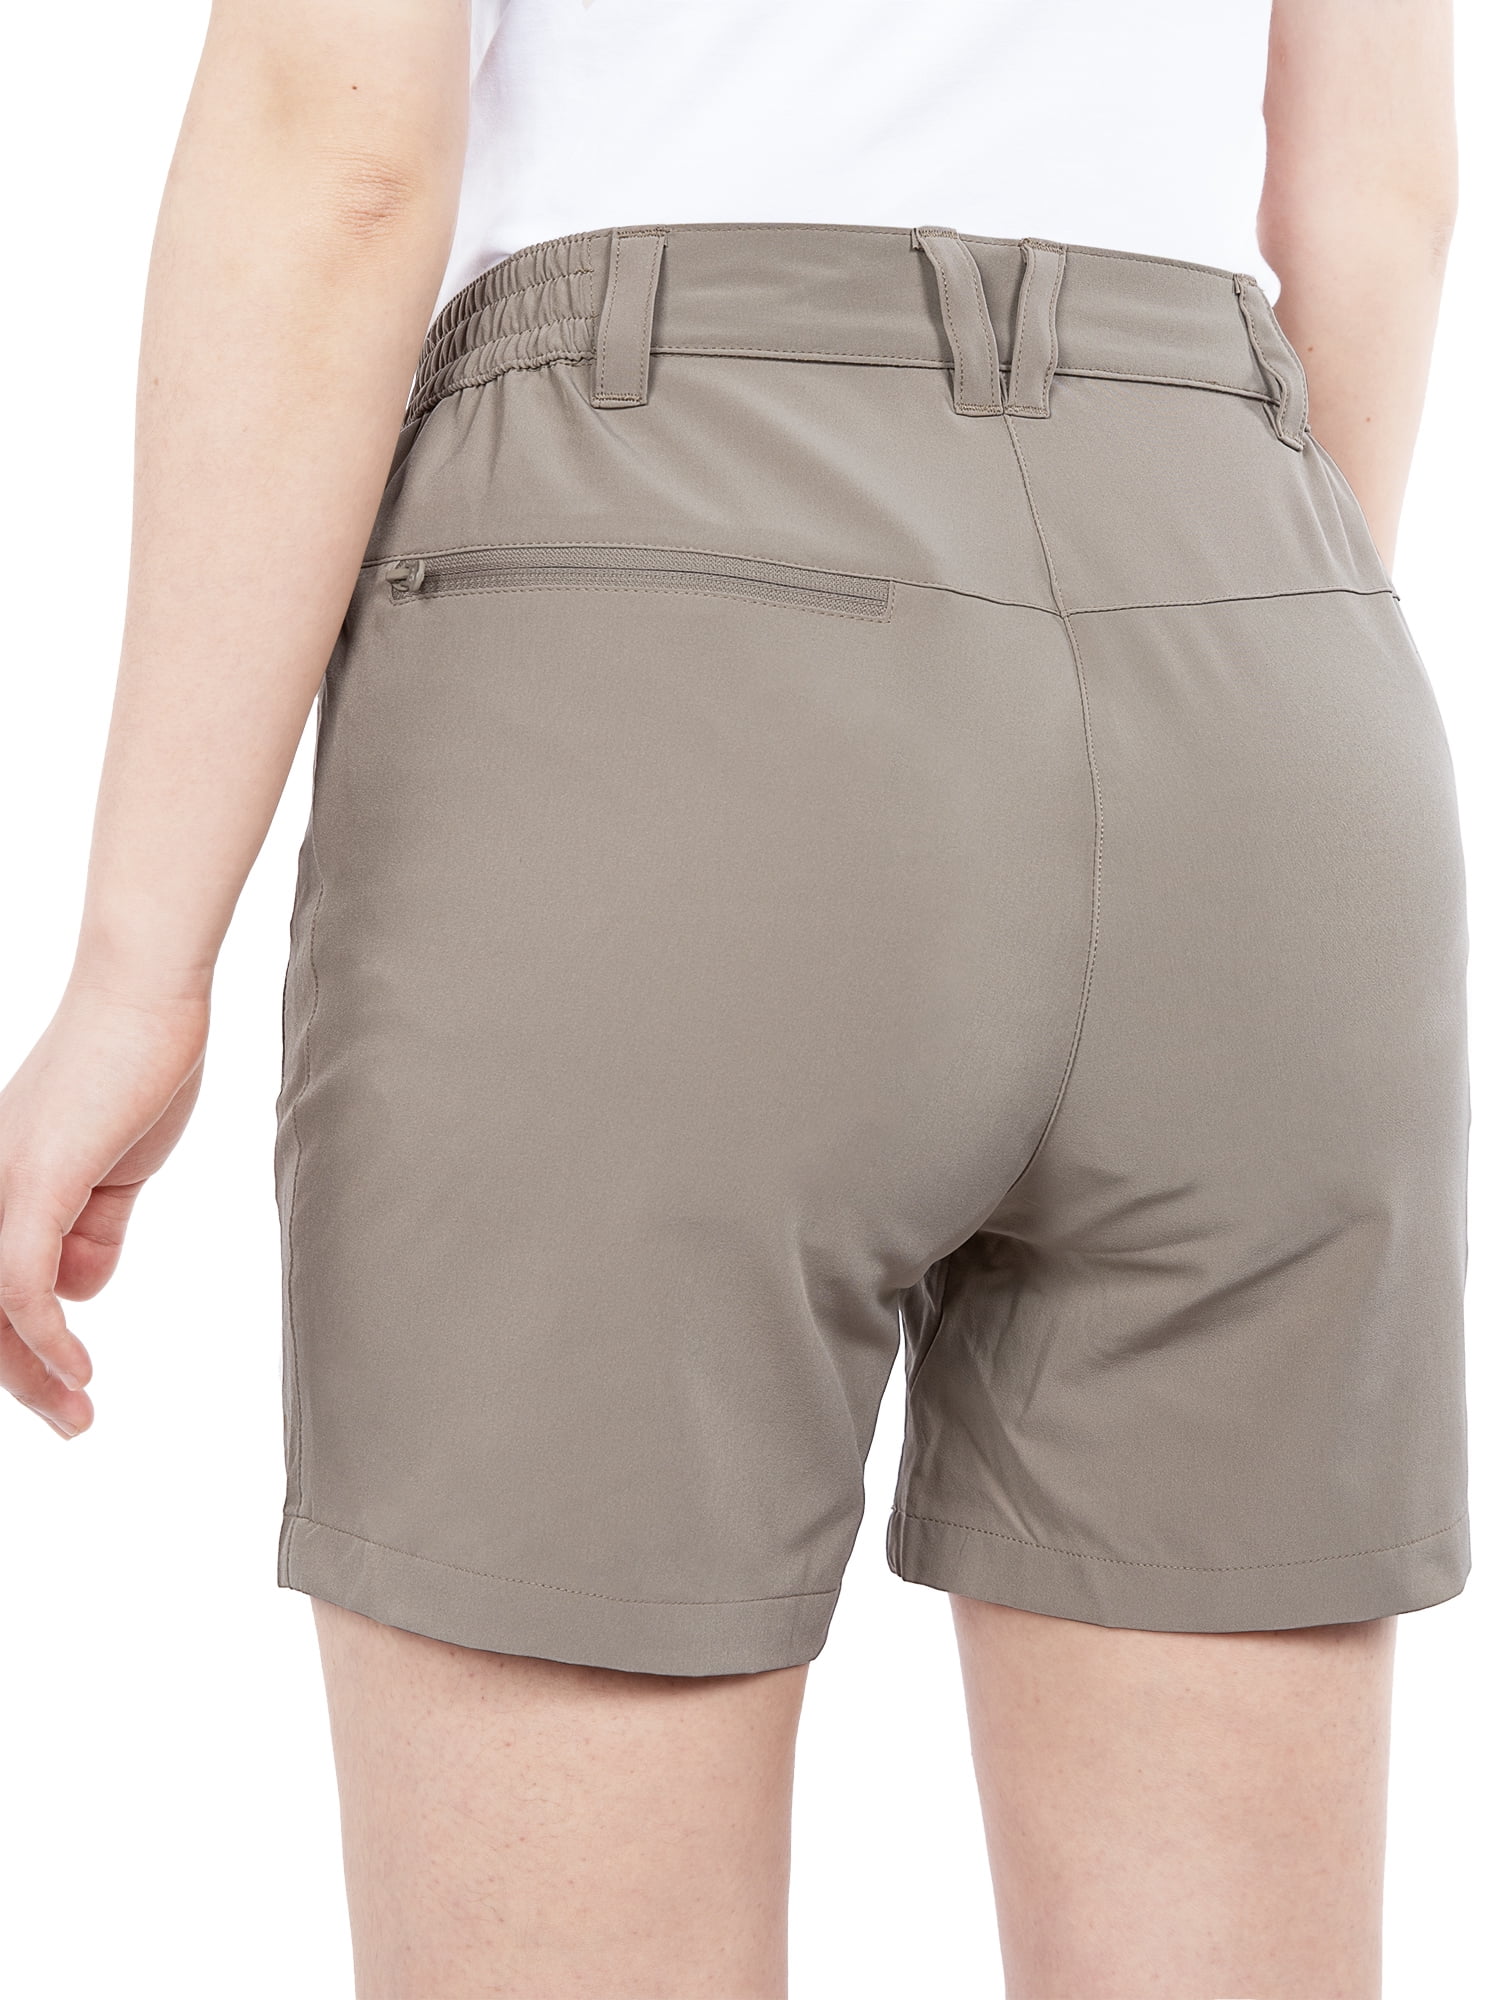 Travel 33,000ft Women's Hiking Shorts Quick Dry Cargo Shorts for Hiking Camping 